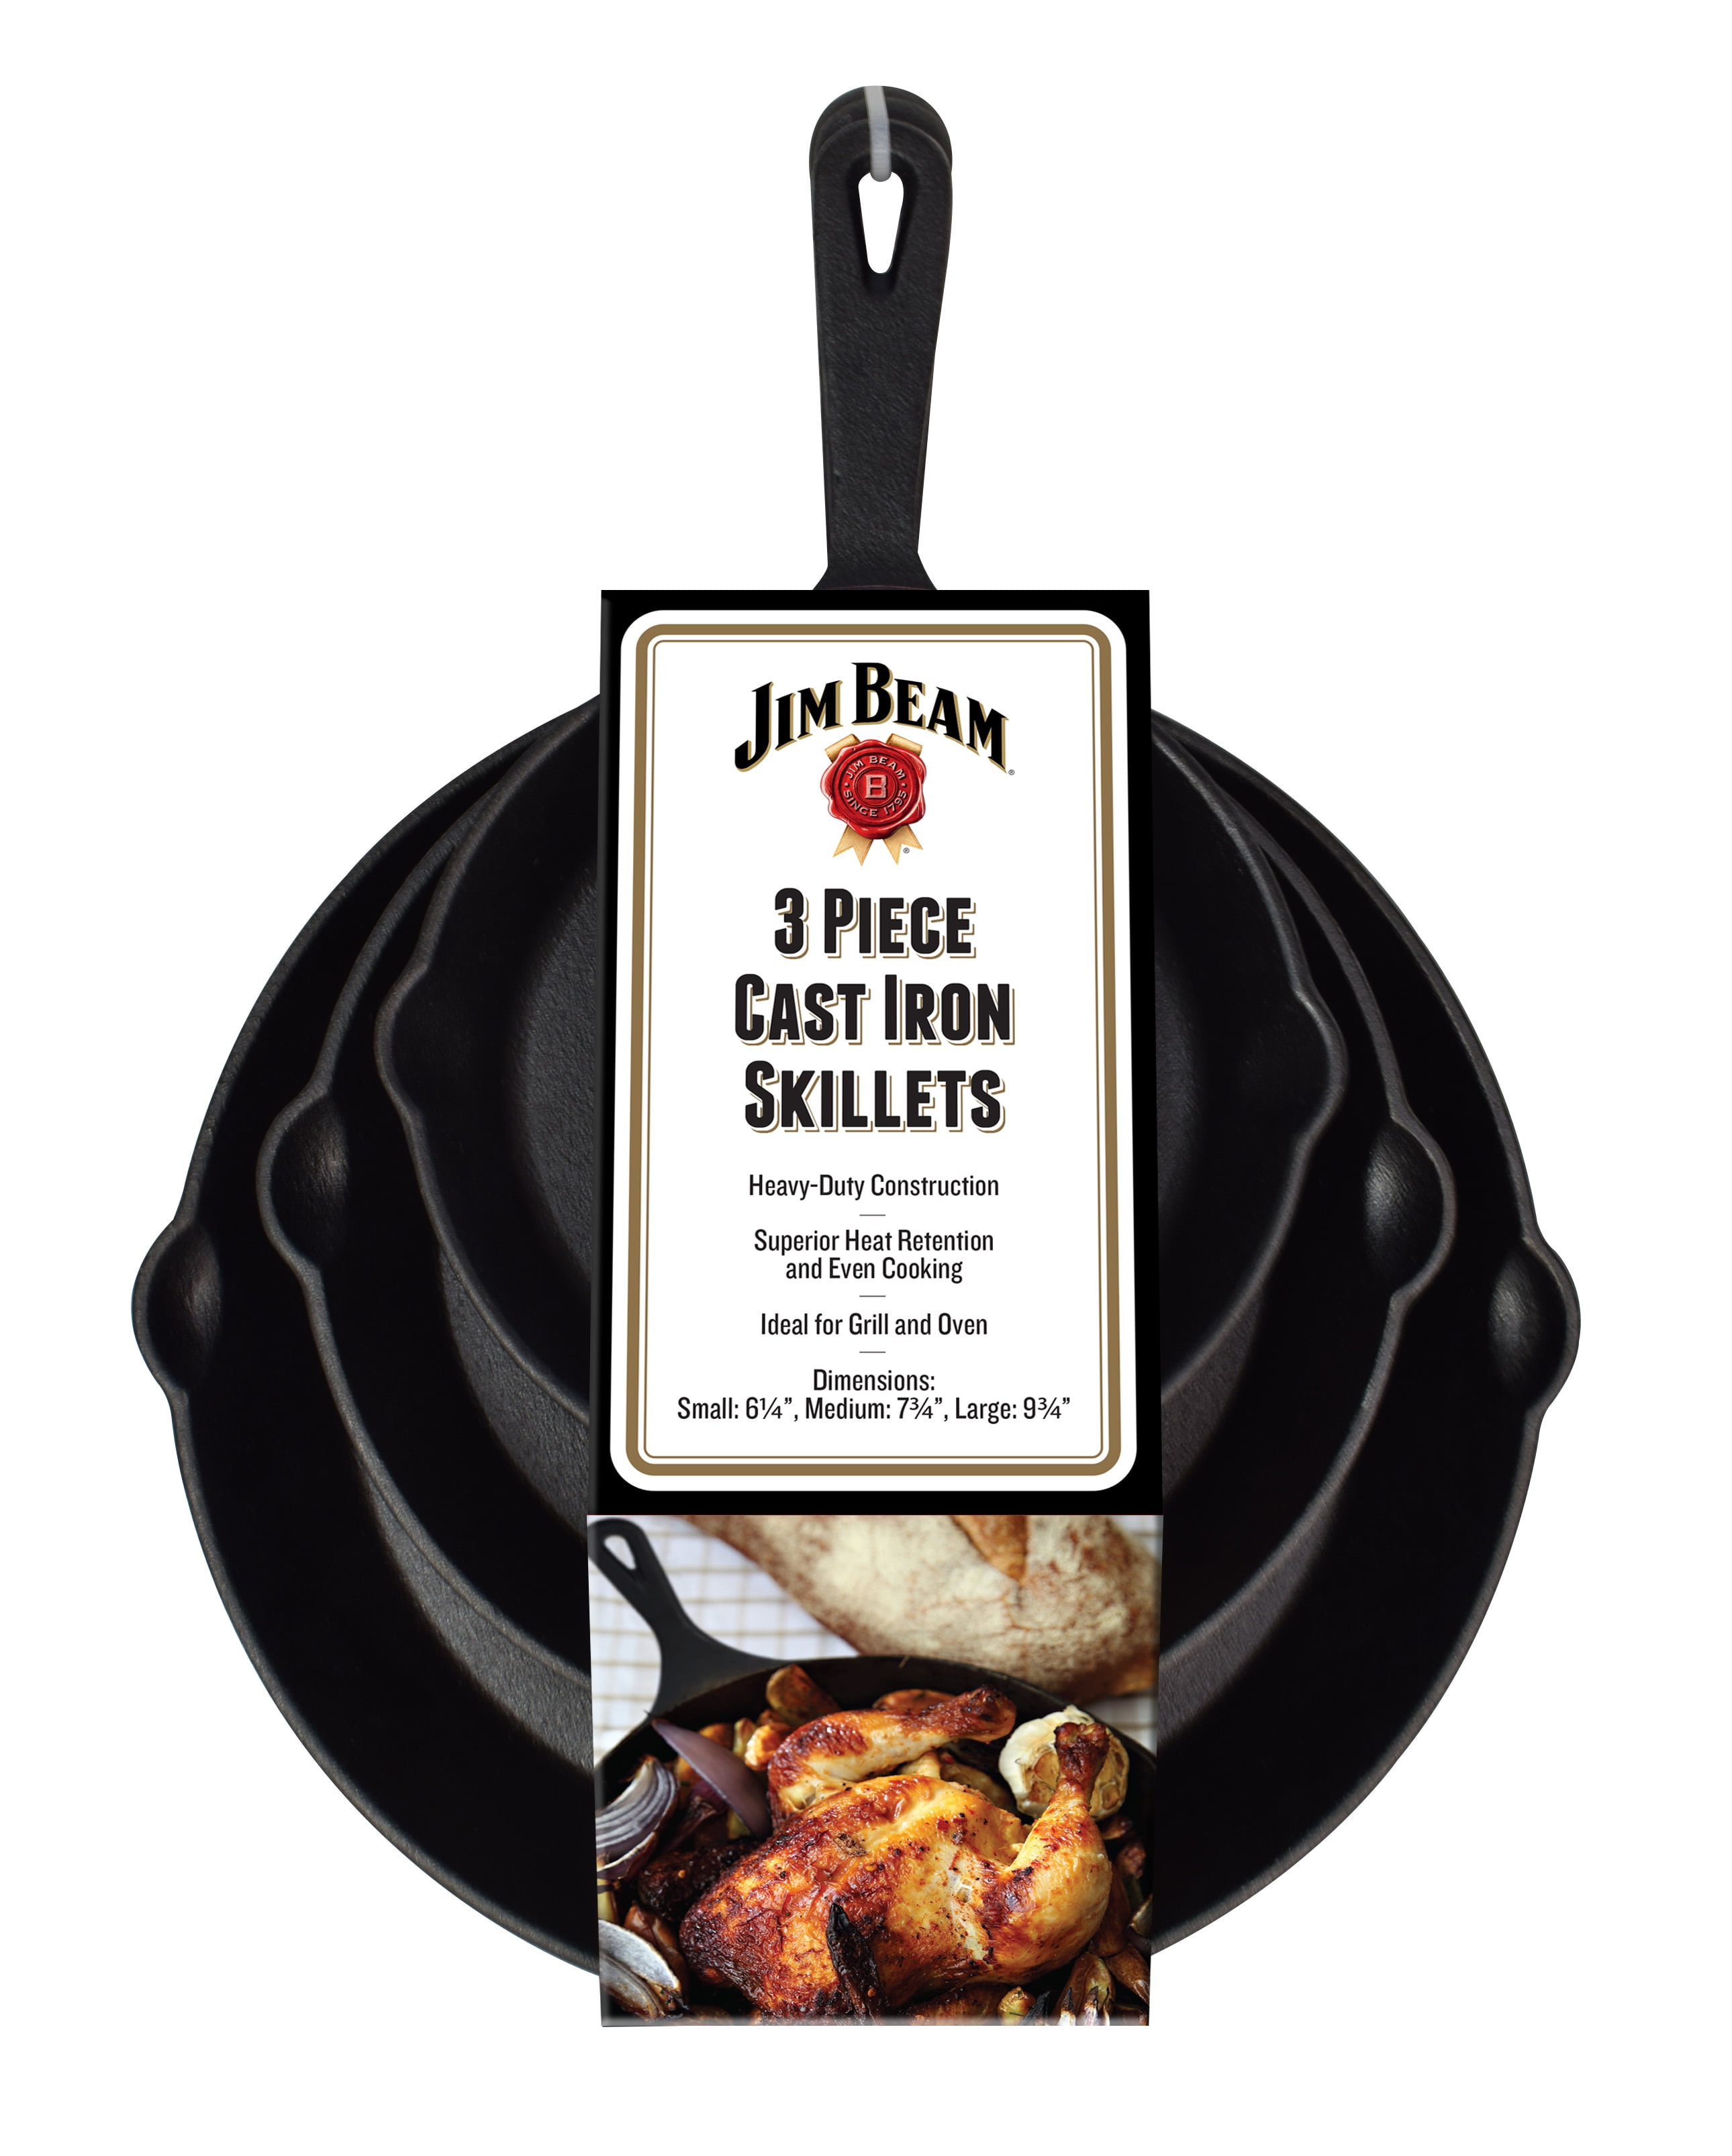 Jim Beam Skillet Pre Seasoned Heavy Duty Construction Double Sided Cast Iron Griddle Pan with Superior Heat Retention, 20x1x9, Large, Black,BBQ168